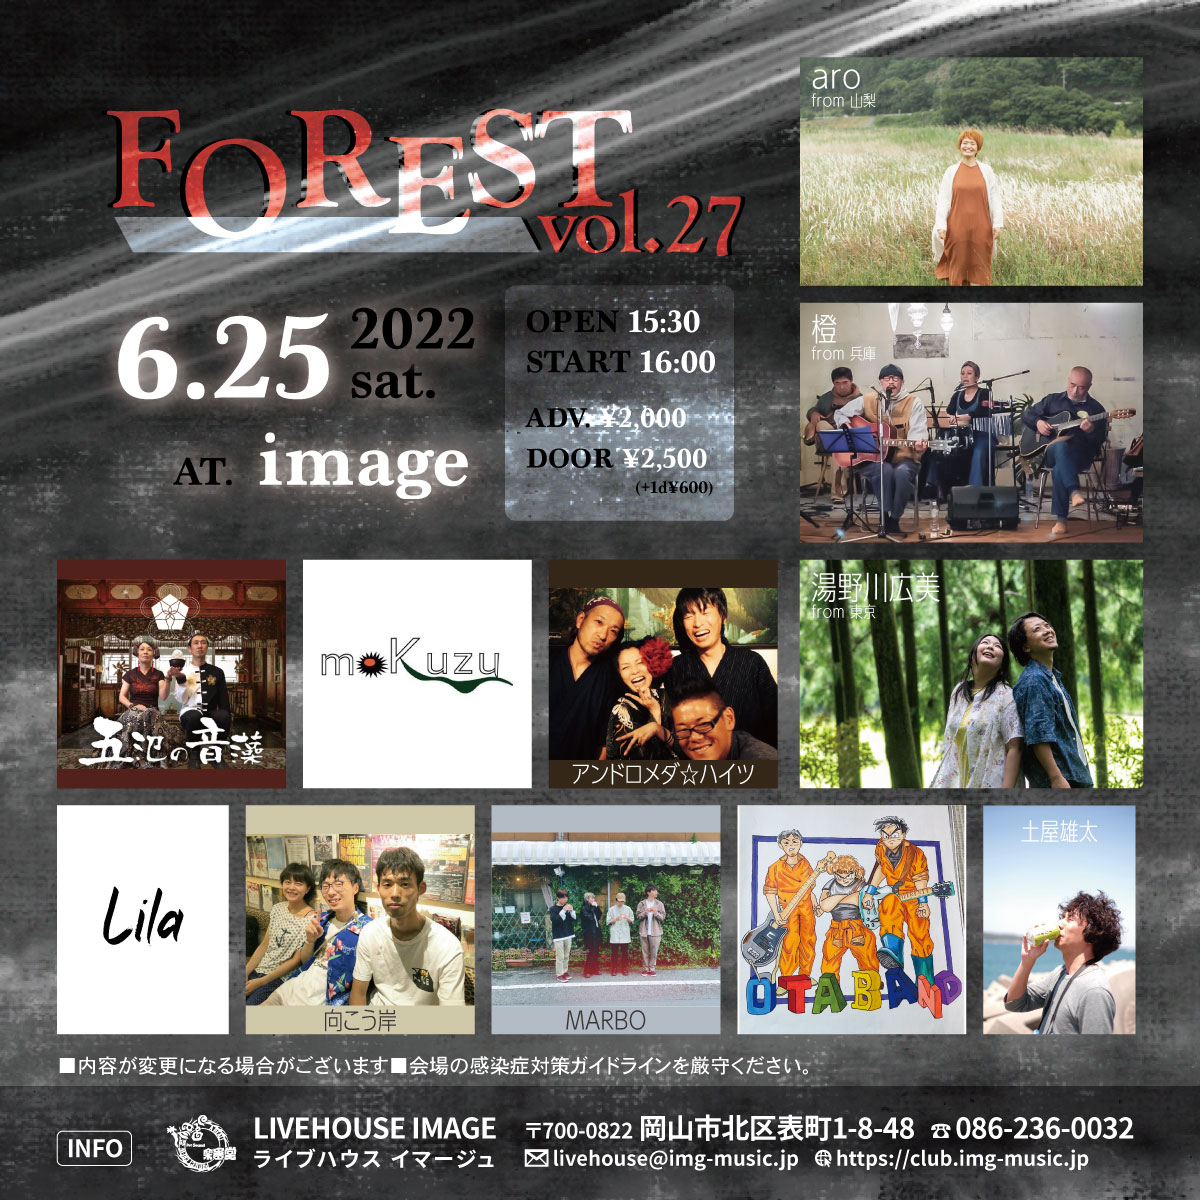 FOREST vol.27